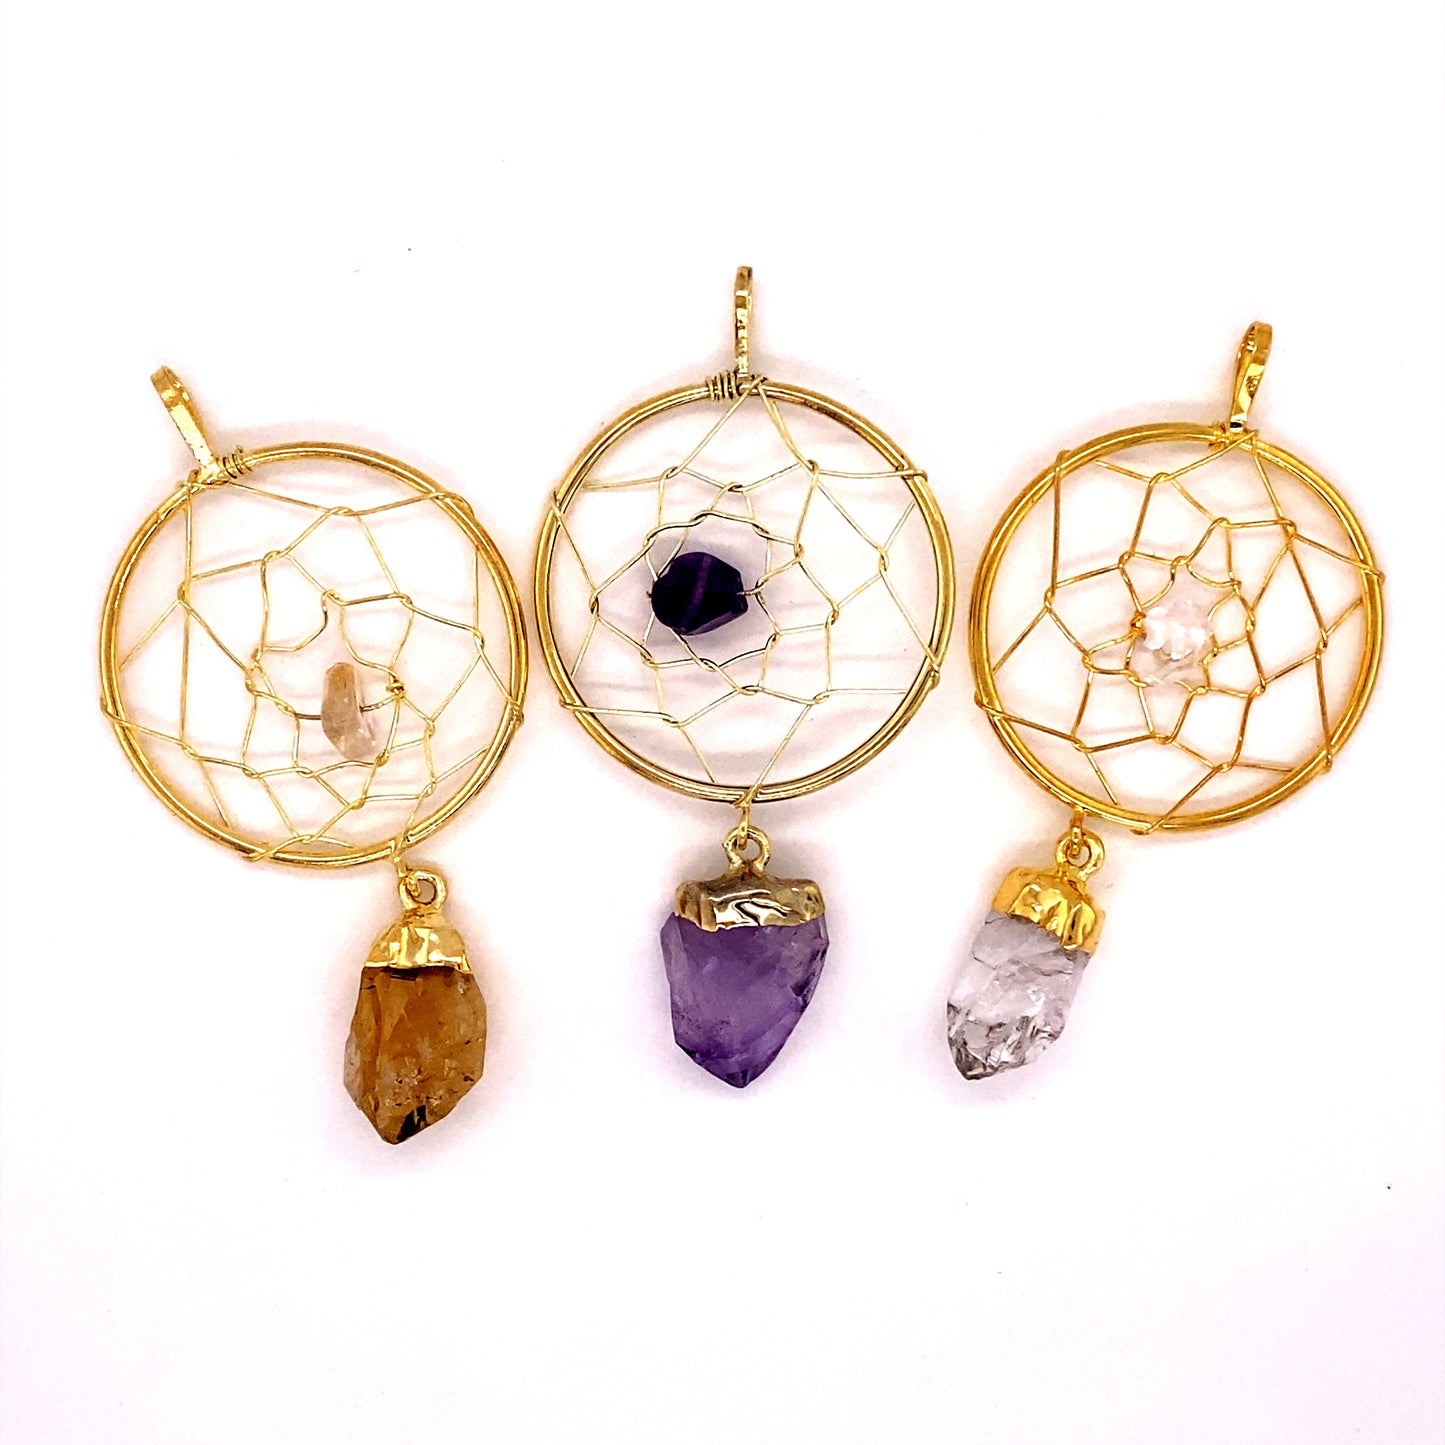 Three Gold Dreamcatcher Pendants with Gemstone Point drops by Super Silver.